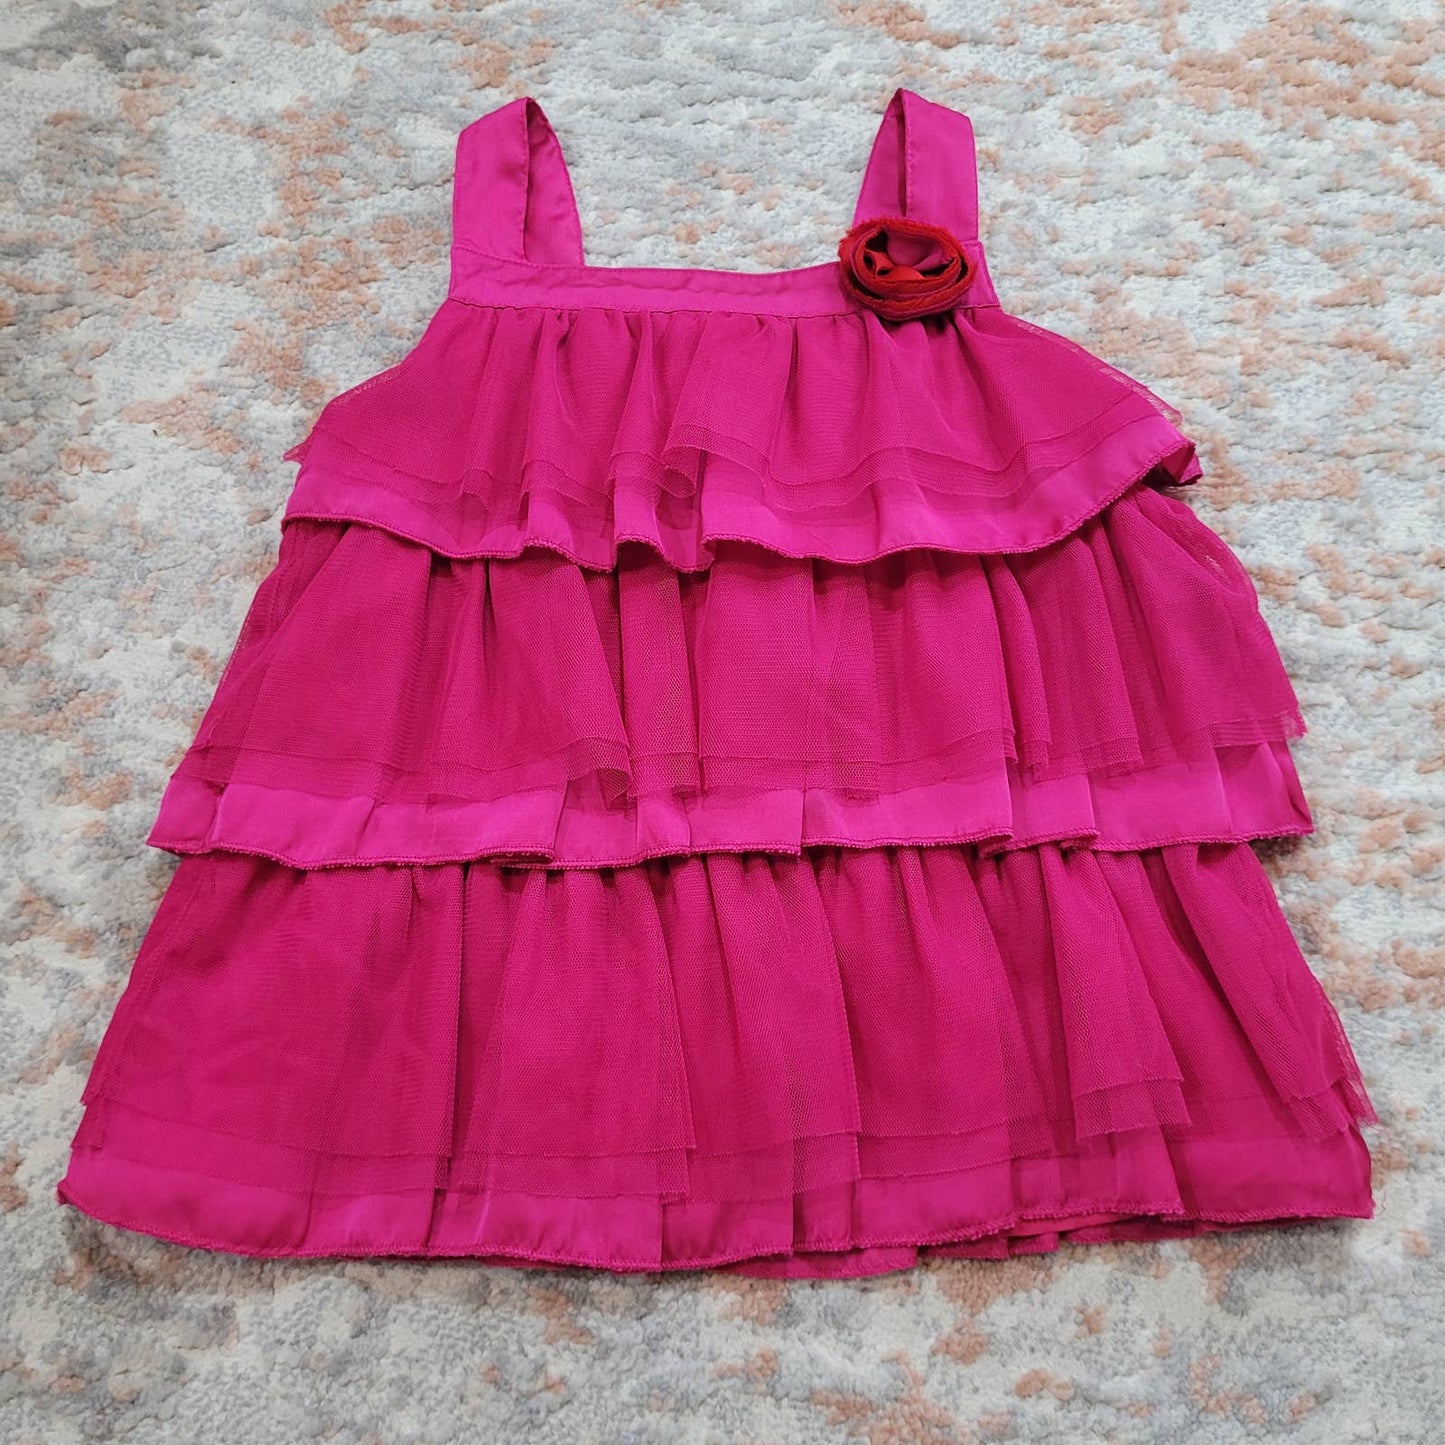 H&M Pink Tiered Ruffle Sleeveless Dress with Flower Accent - Size 7-8Y